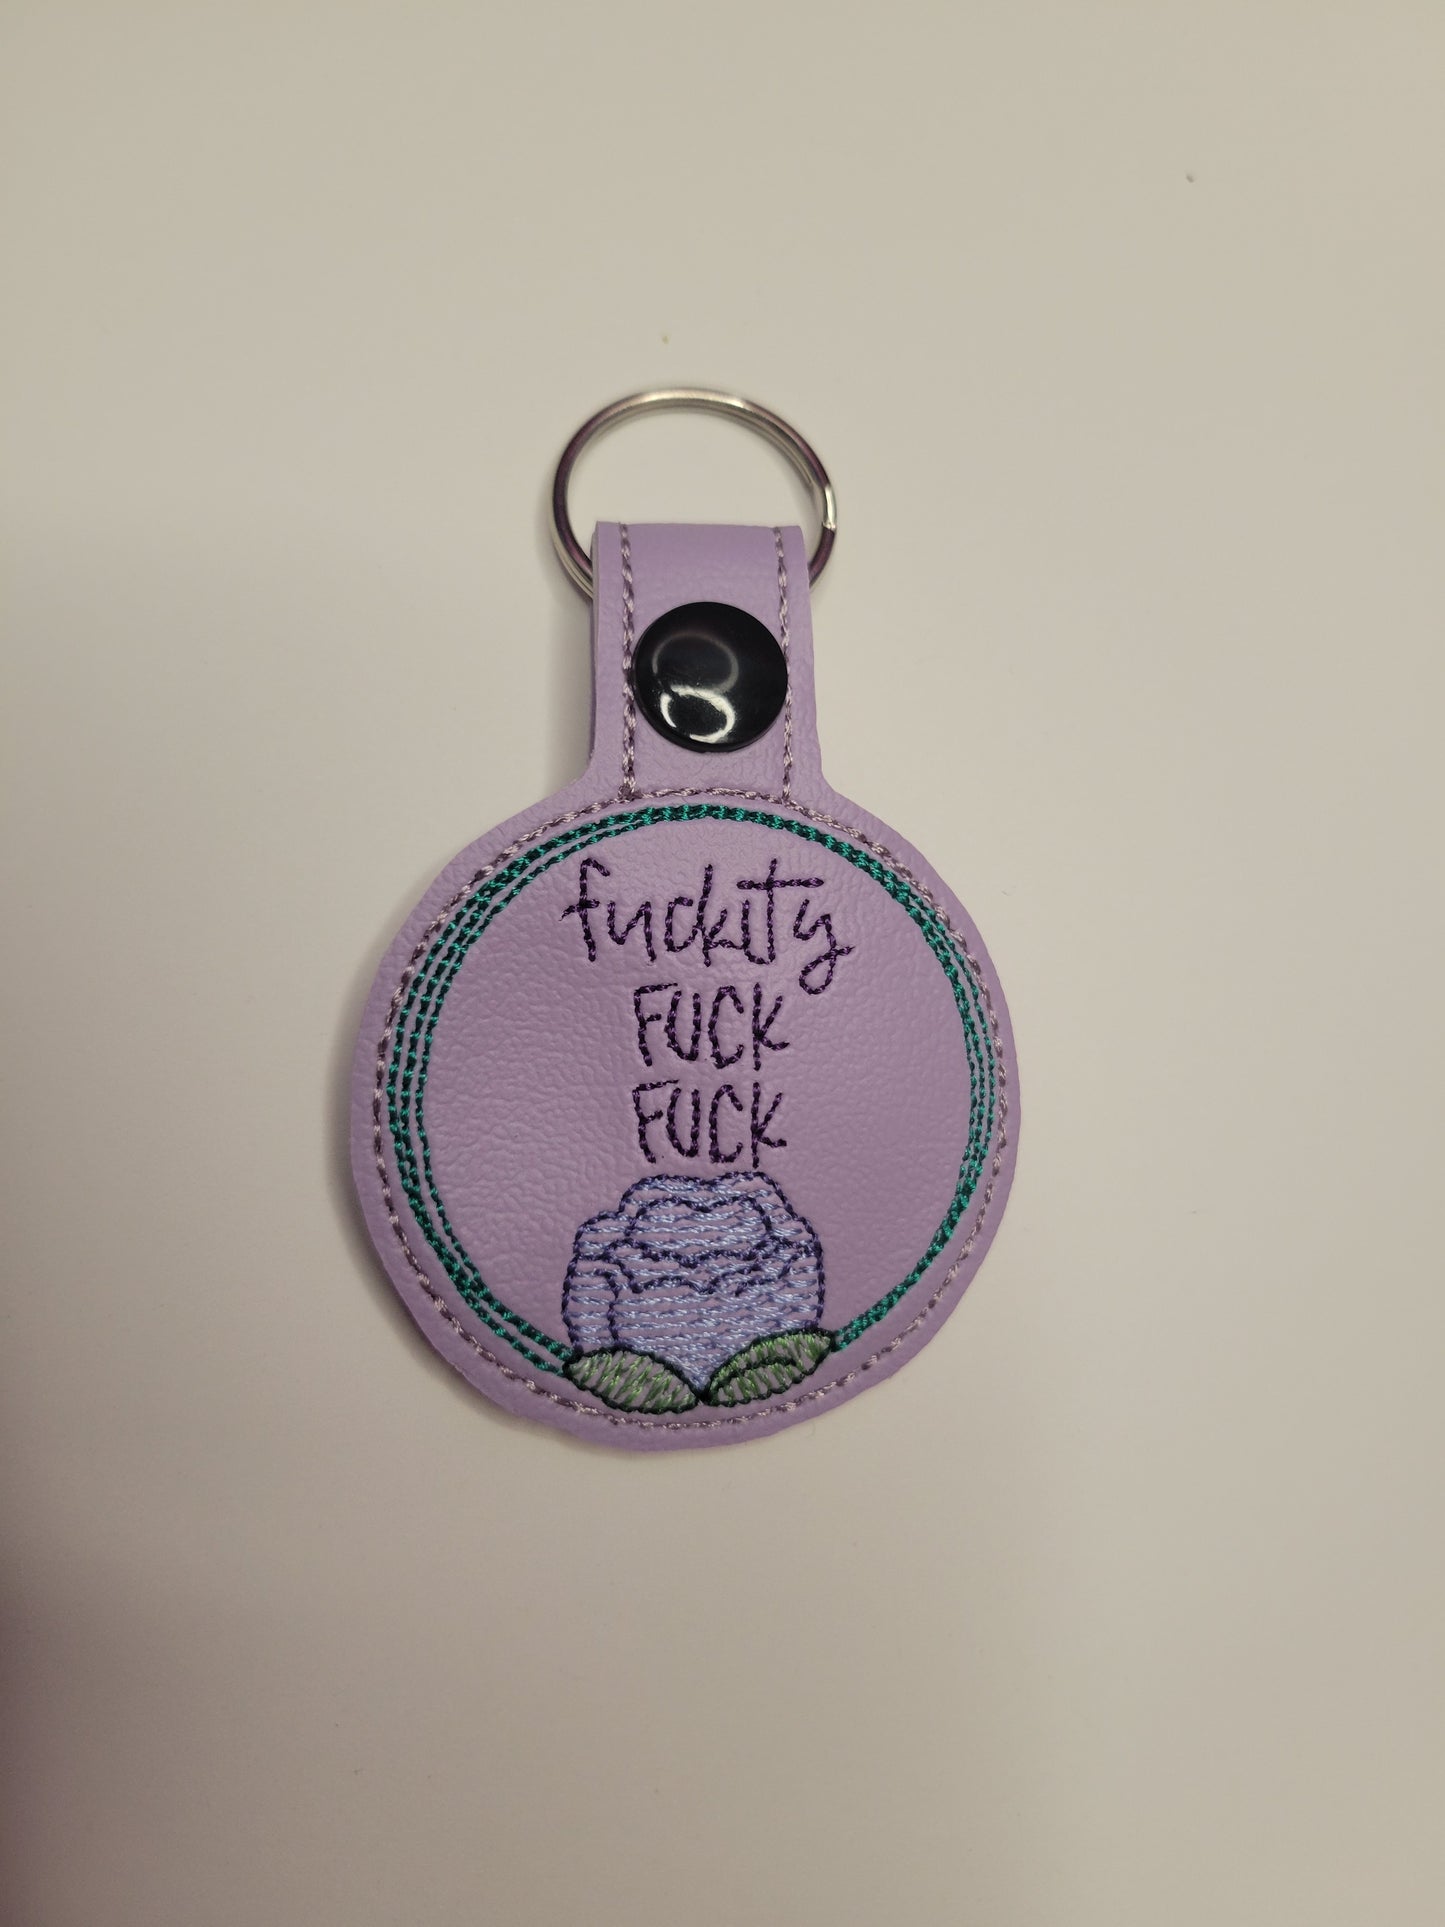 Fuckity Embroidered Key Fob